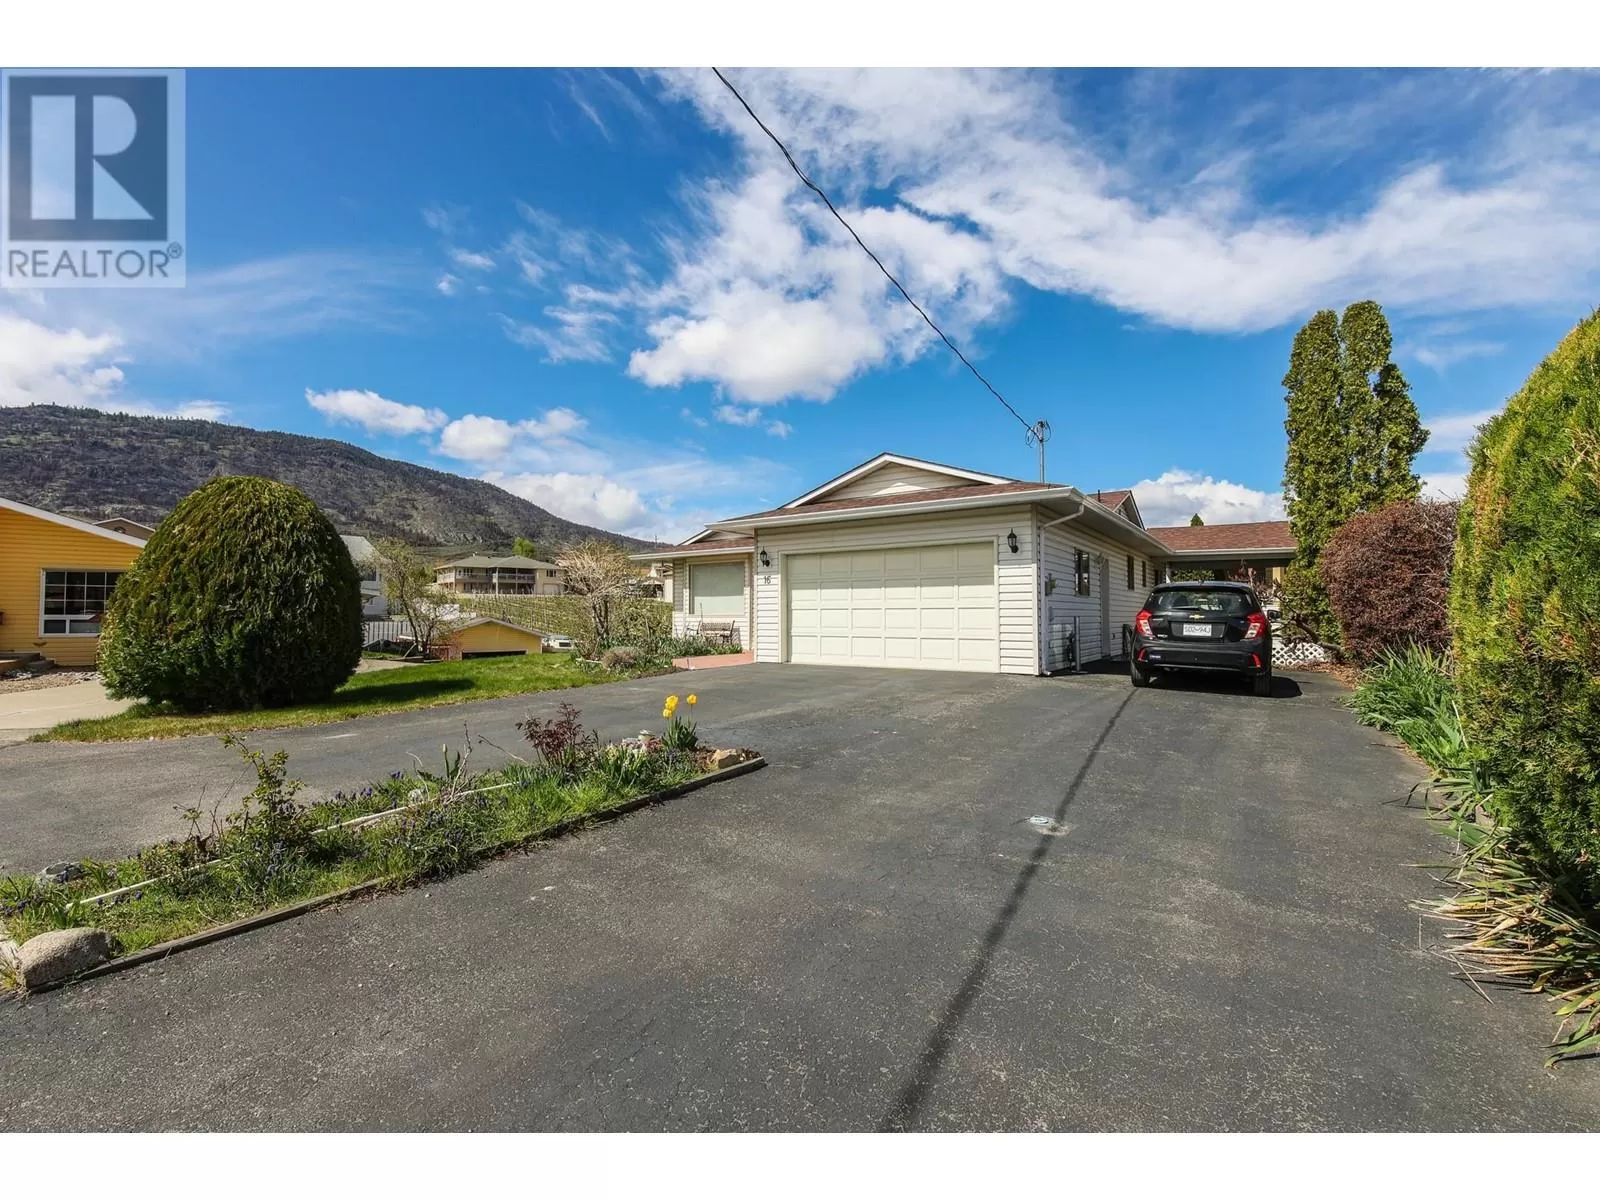 House for rent: 16 Yucca Place, Osoyoos, British Columbia V0H 1V1